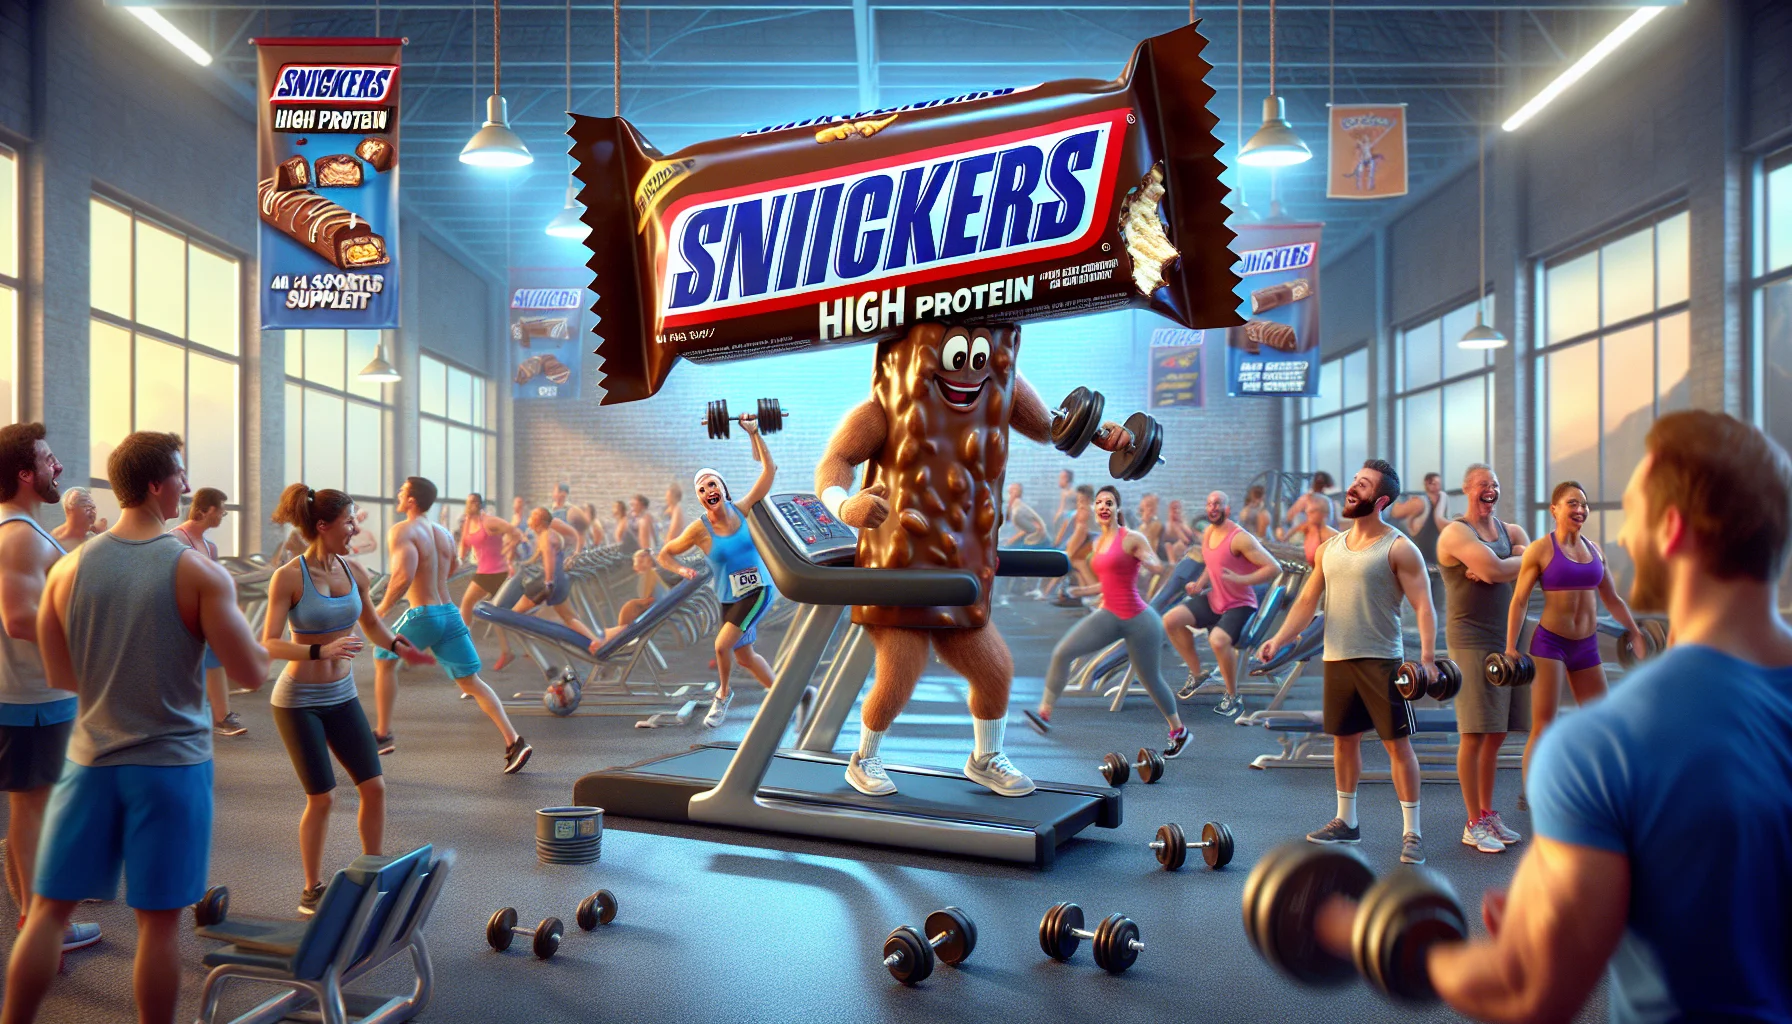 An amusing scenario set in a bustling gym full of athletes of various descents and genders. A gigantic Snickers High Protein bar has magically come alive and is playfully participating in the workout, lifting dumbbells and running on the treadmill. Other gym members are looking in surprise, their faces radiating interest. The logo of the Snickers High Protein bar is prominently displayed on the bar and there is a banner in the background promoting its use as a sports supplement. The image should convey the message in a humorous, but persuasive way that these protein bars are an efficient supplement for sports enthusiasts.